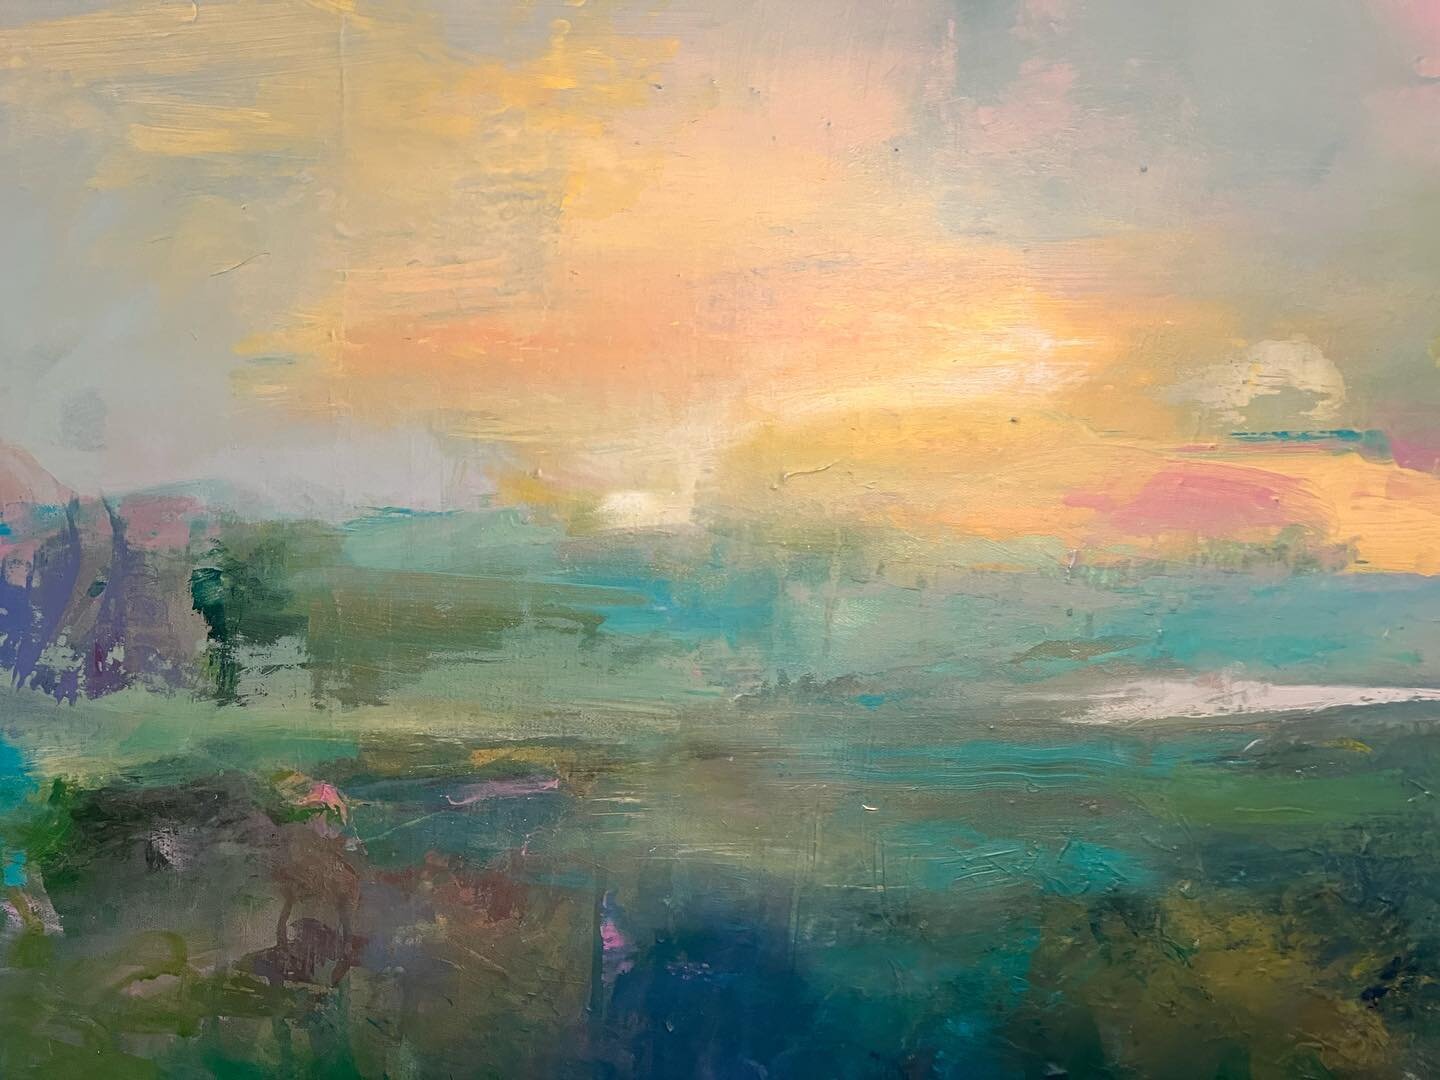 This is a hatha landscape - both sun and moon are featured at sunset in my imagination. It is between two places - Ashdown Forest and that Sussex Downs. All the views, all the awe in one. #paintingoftheday

-
-
-
#landscapeart 
#acrylicart
#texturear